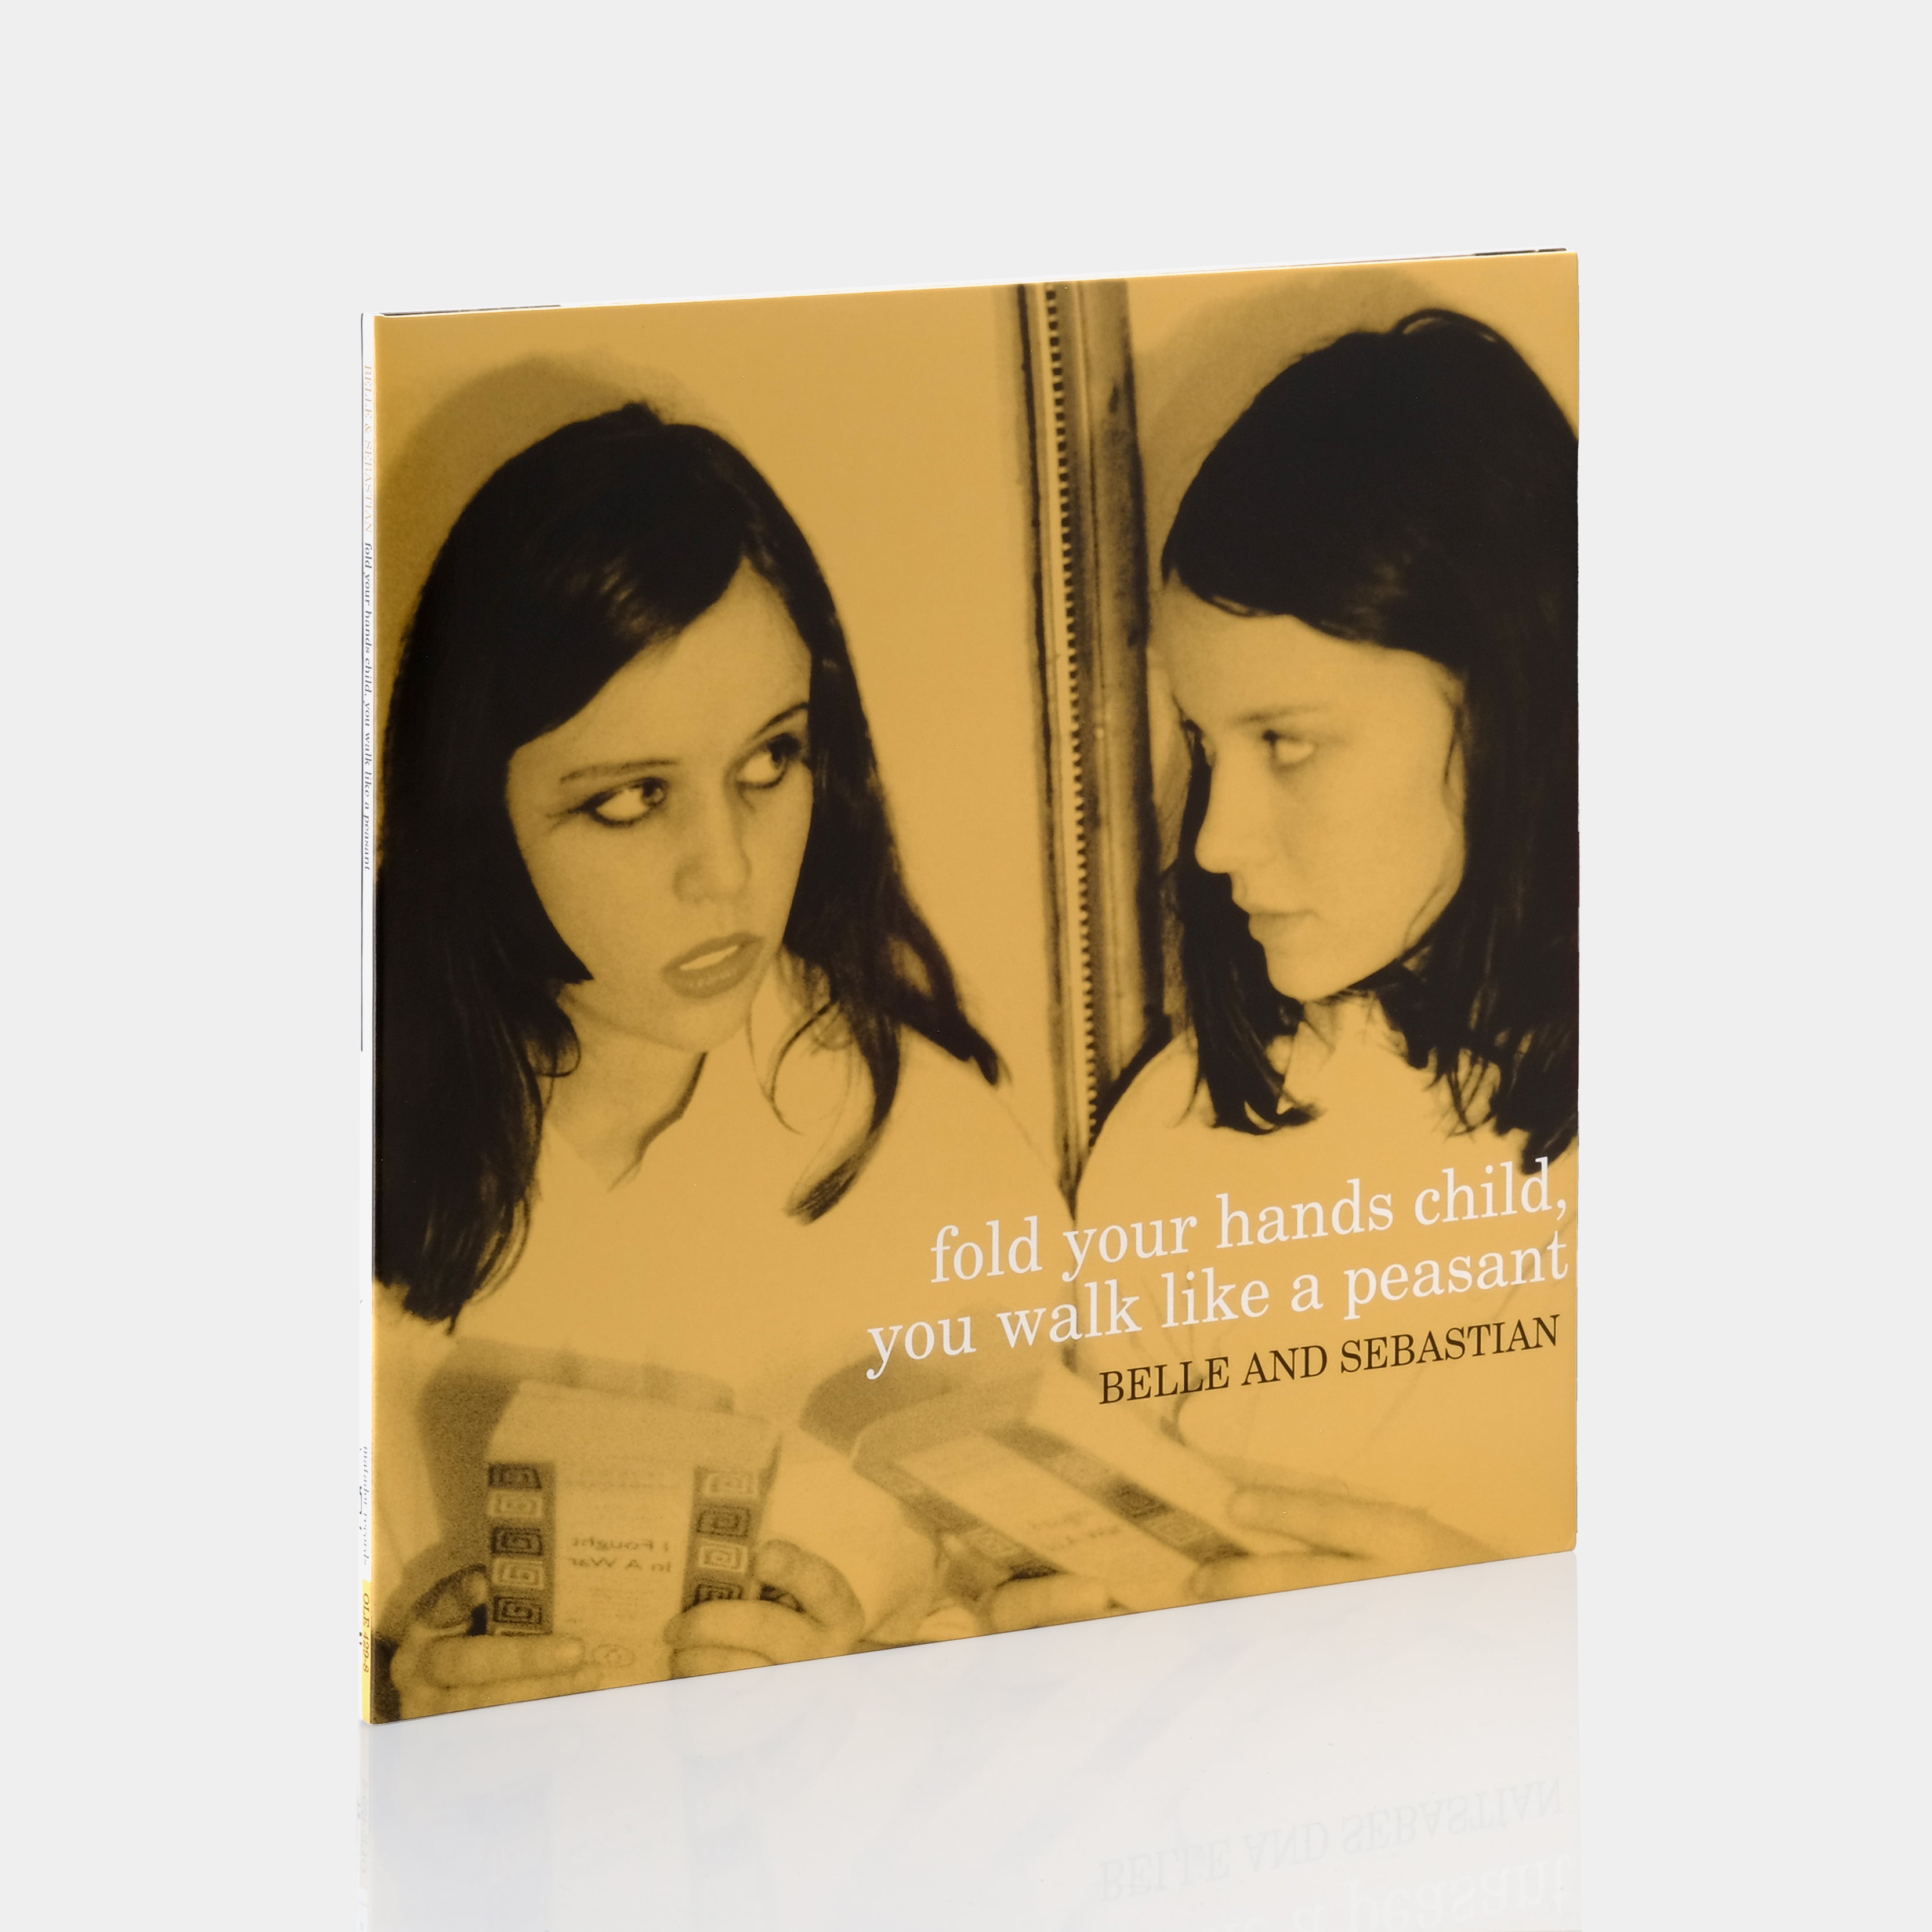 Belle And Sebastian - Fold Your Hands Child, You Walk Like A Peasant LP Vinyl Record